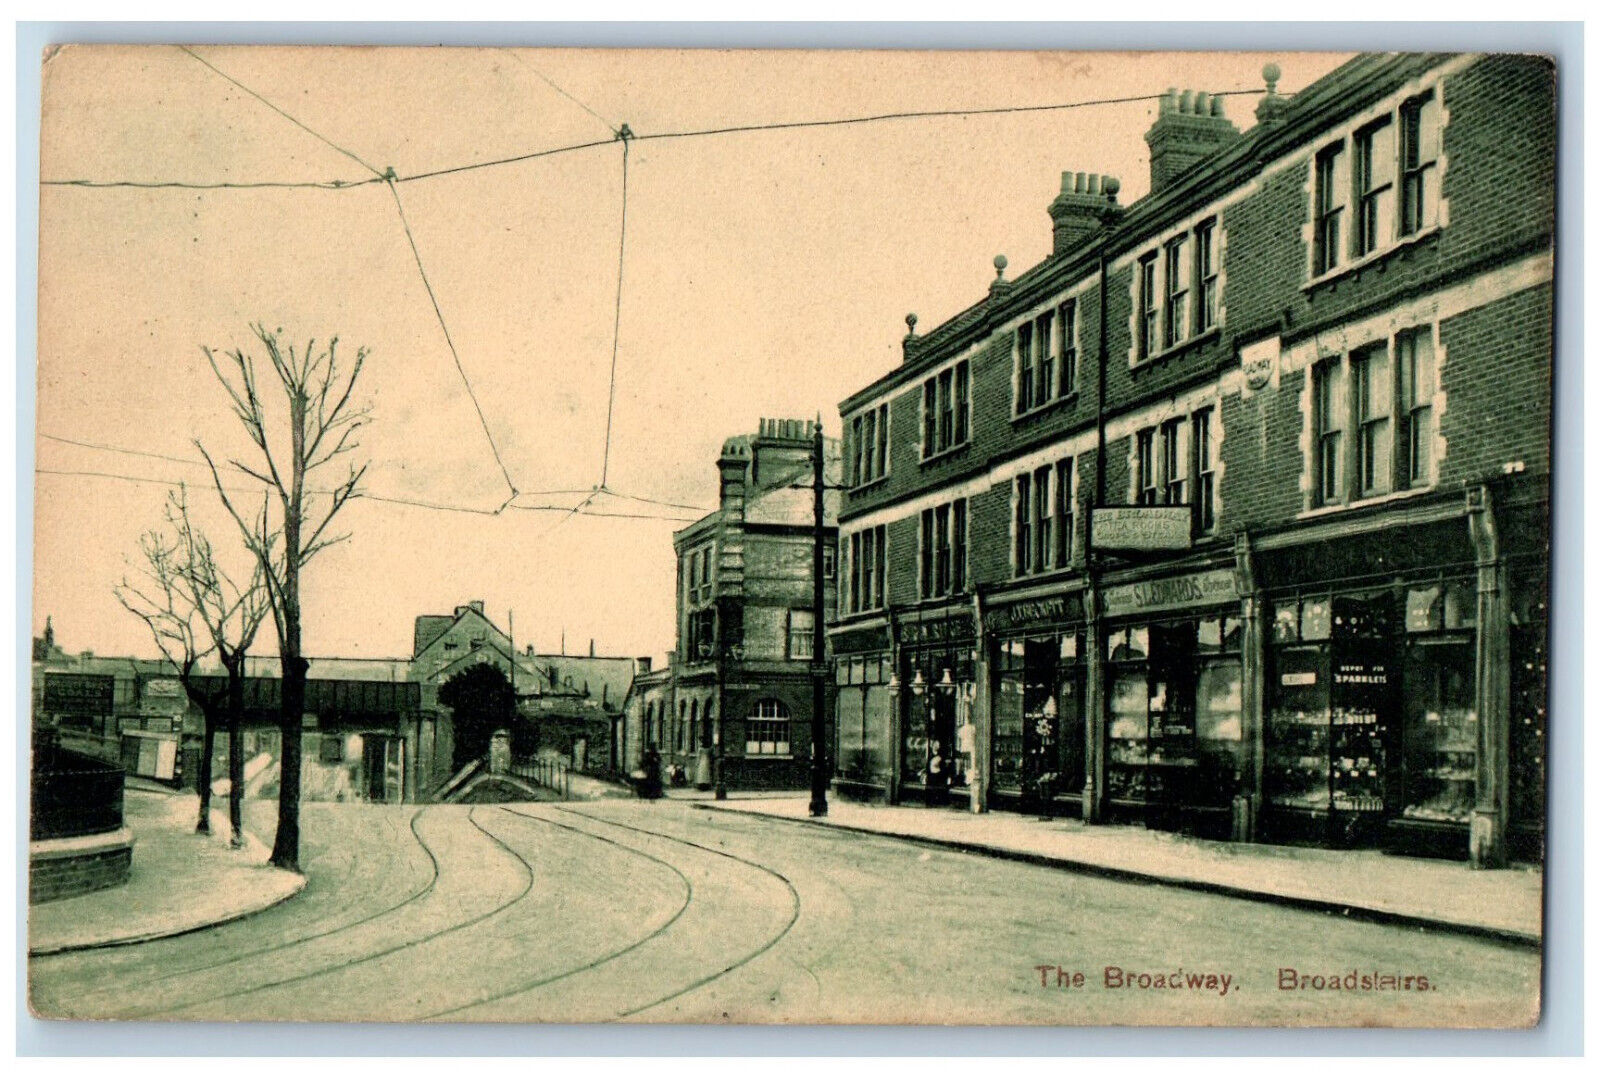 Broadstairs Kent England Postcard The Broadway c1910 Unposted Antique